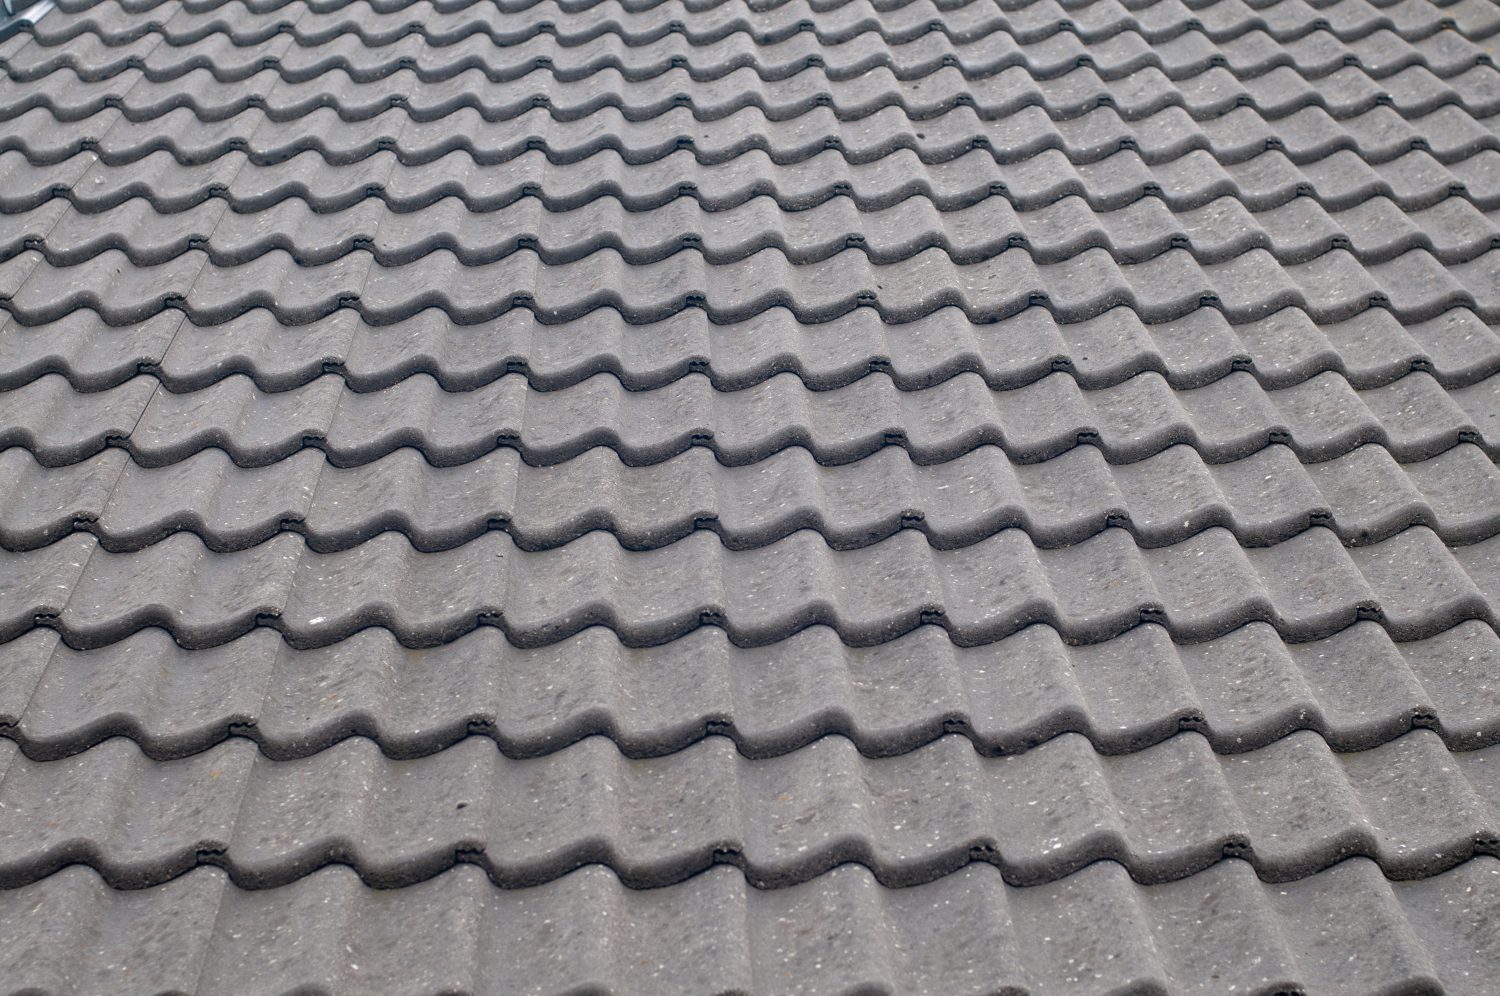 Price vs. Longevity: Which Roofing Material Should I Get?